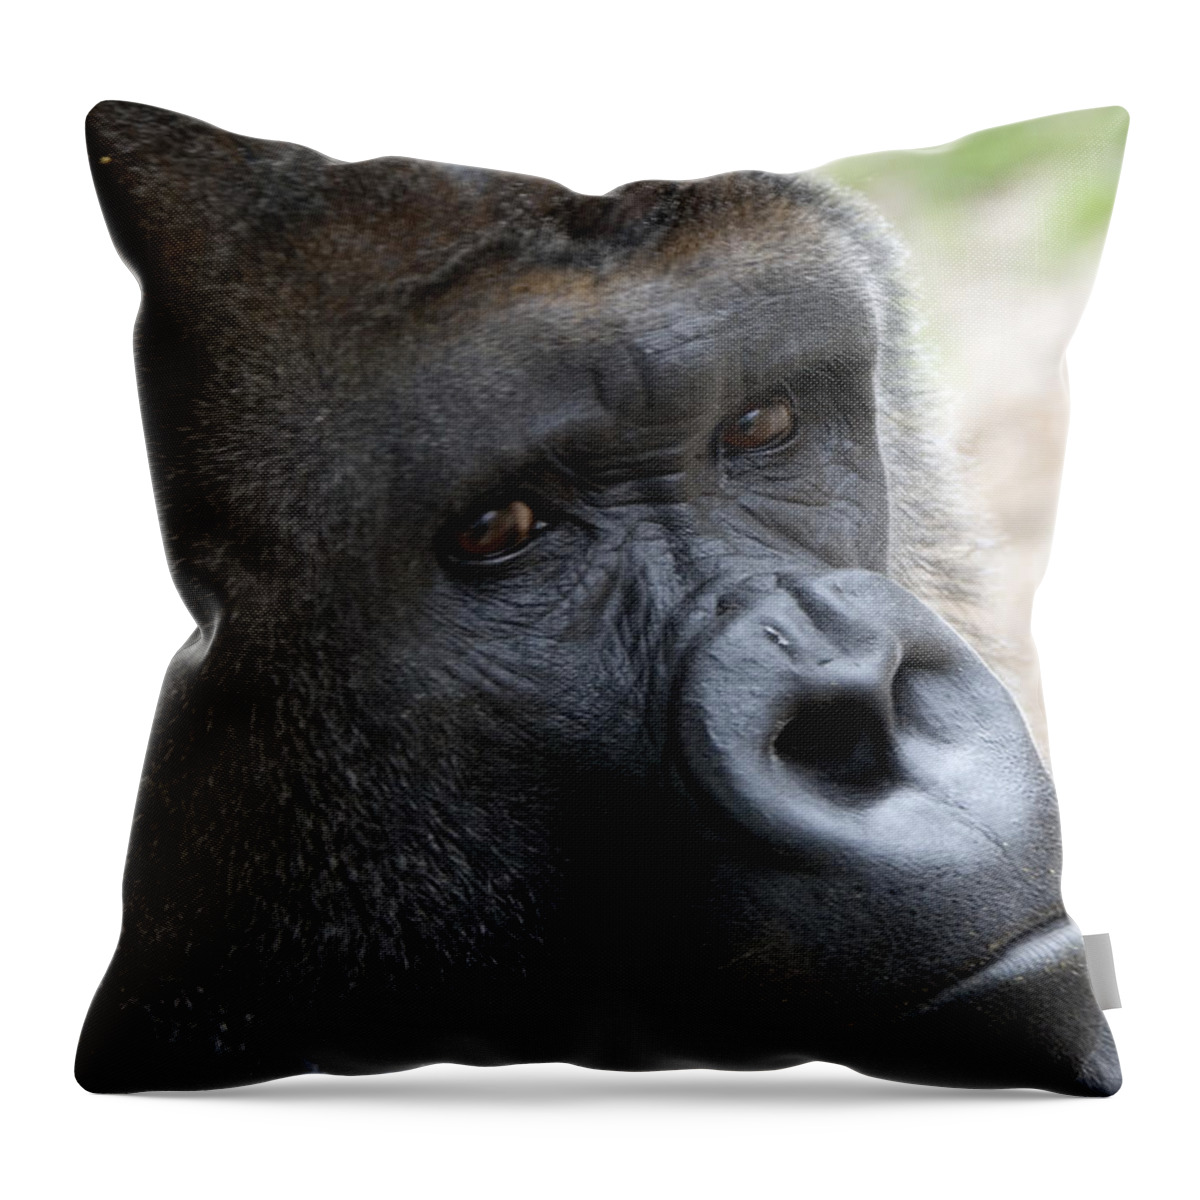 Mammal Throw Pillow featuring the photograph Friend by Kathy Besthorn